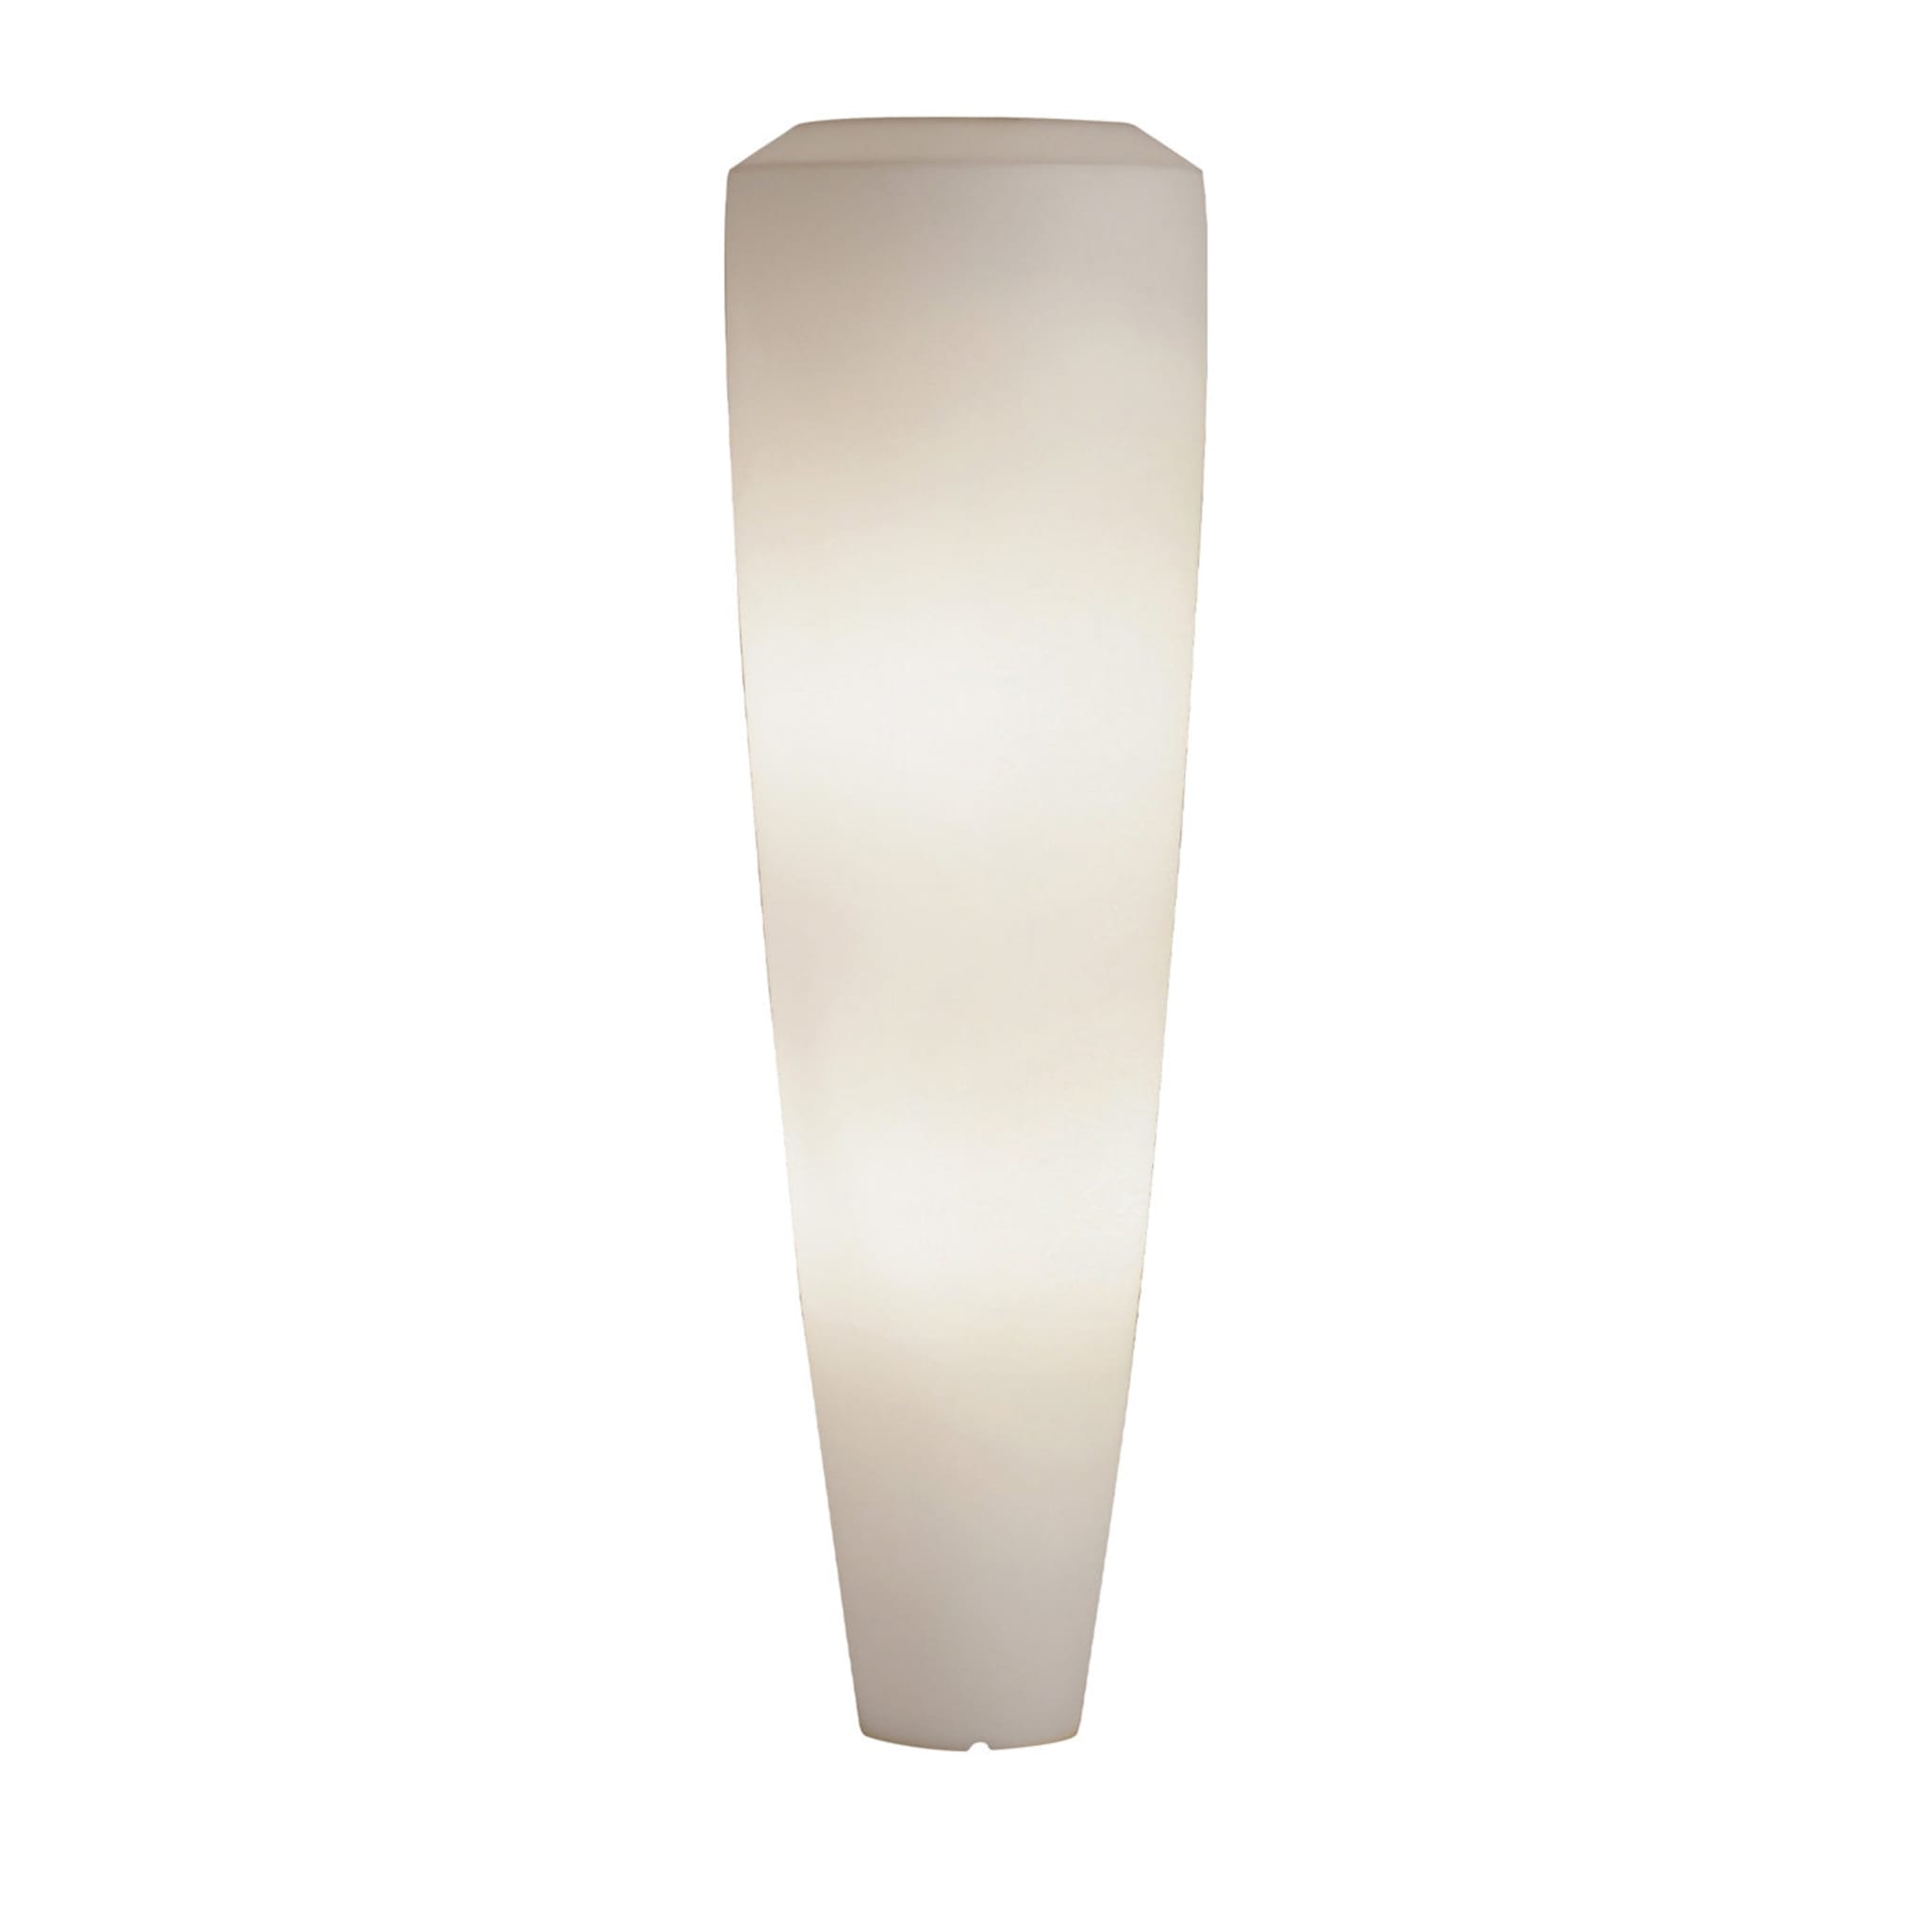 Obice Large White Floor Lamp - Main view